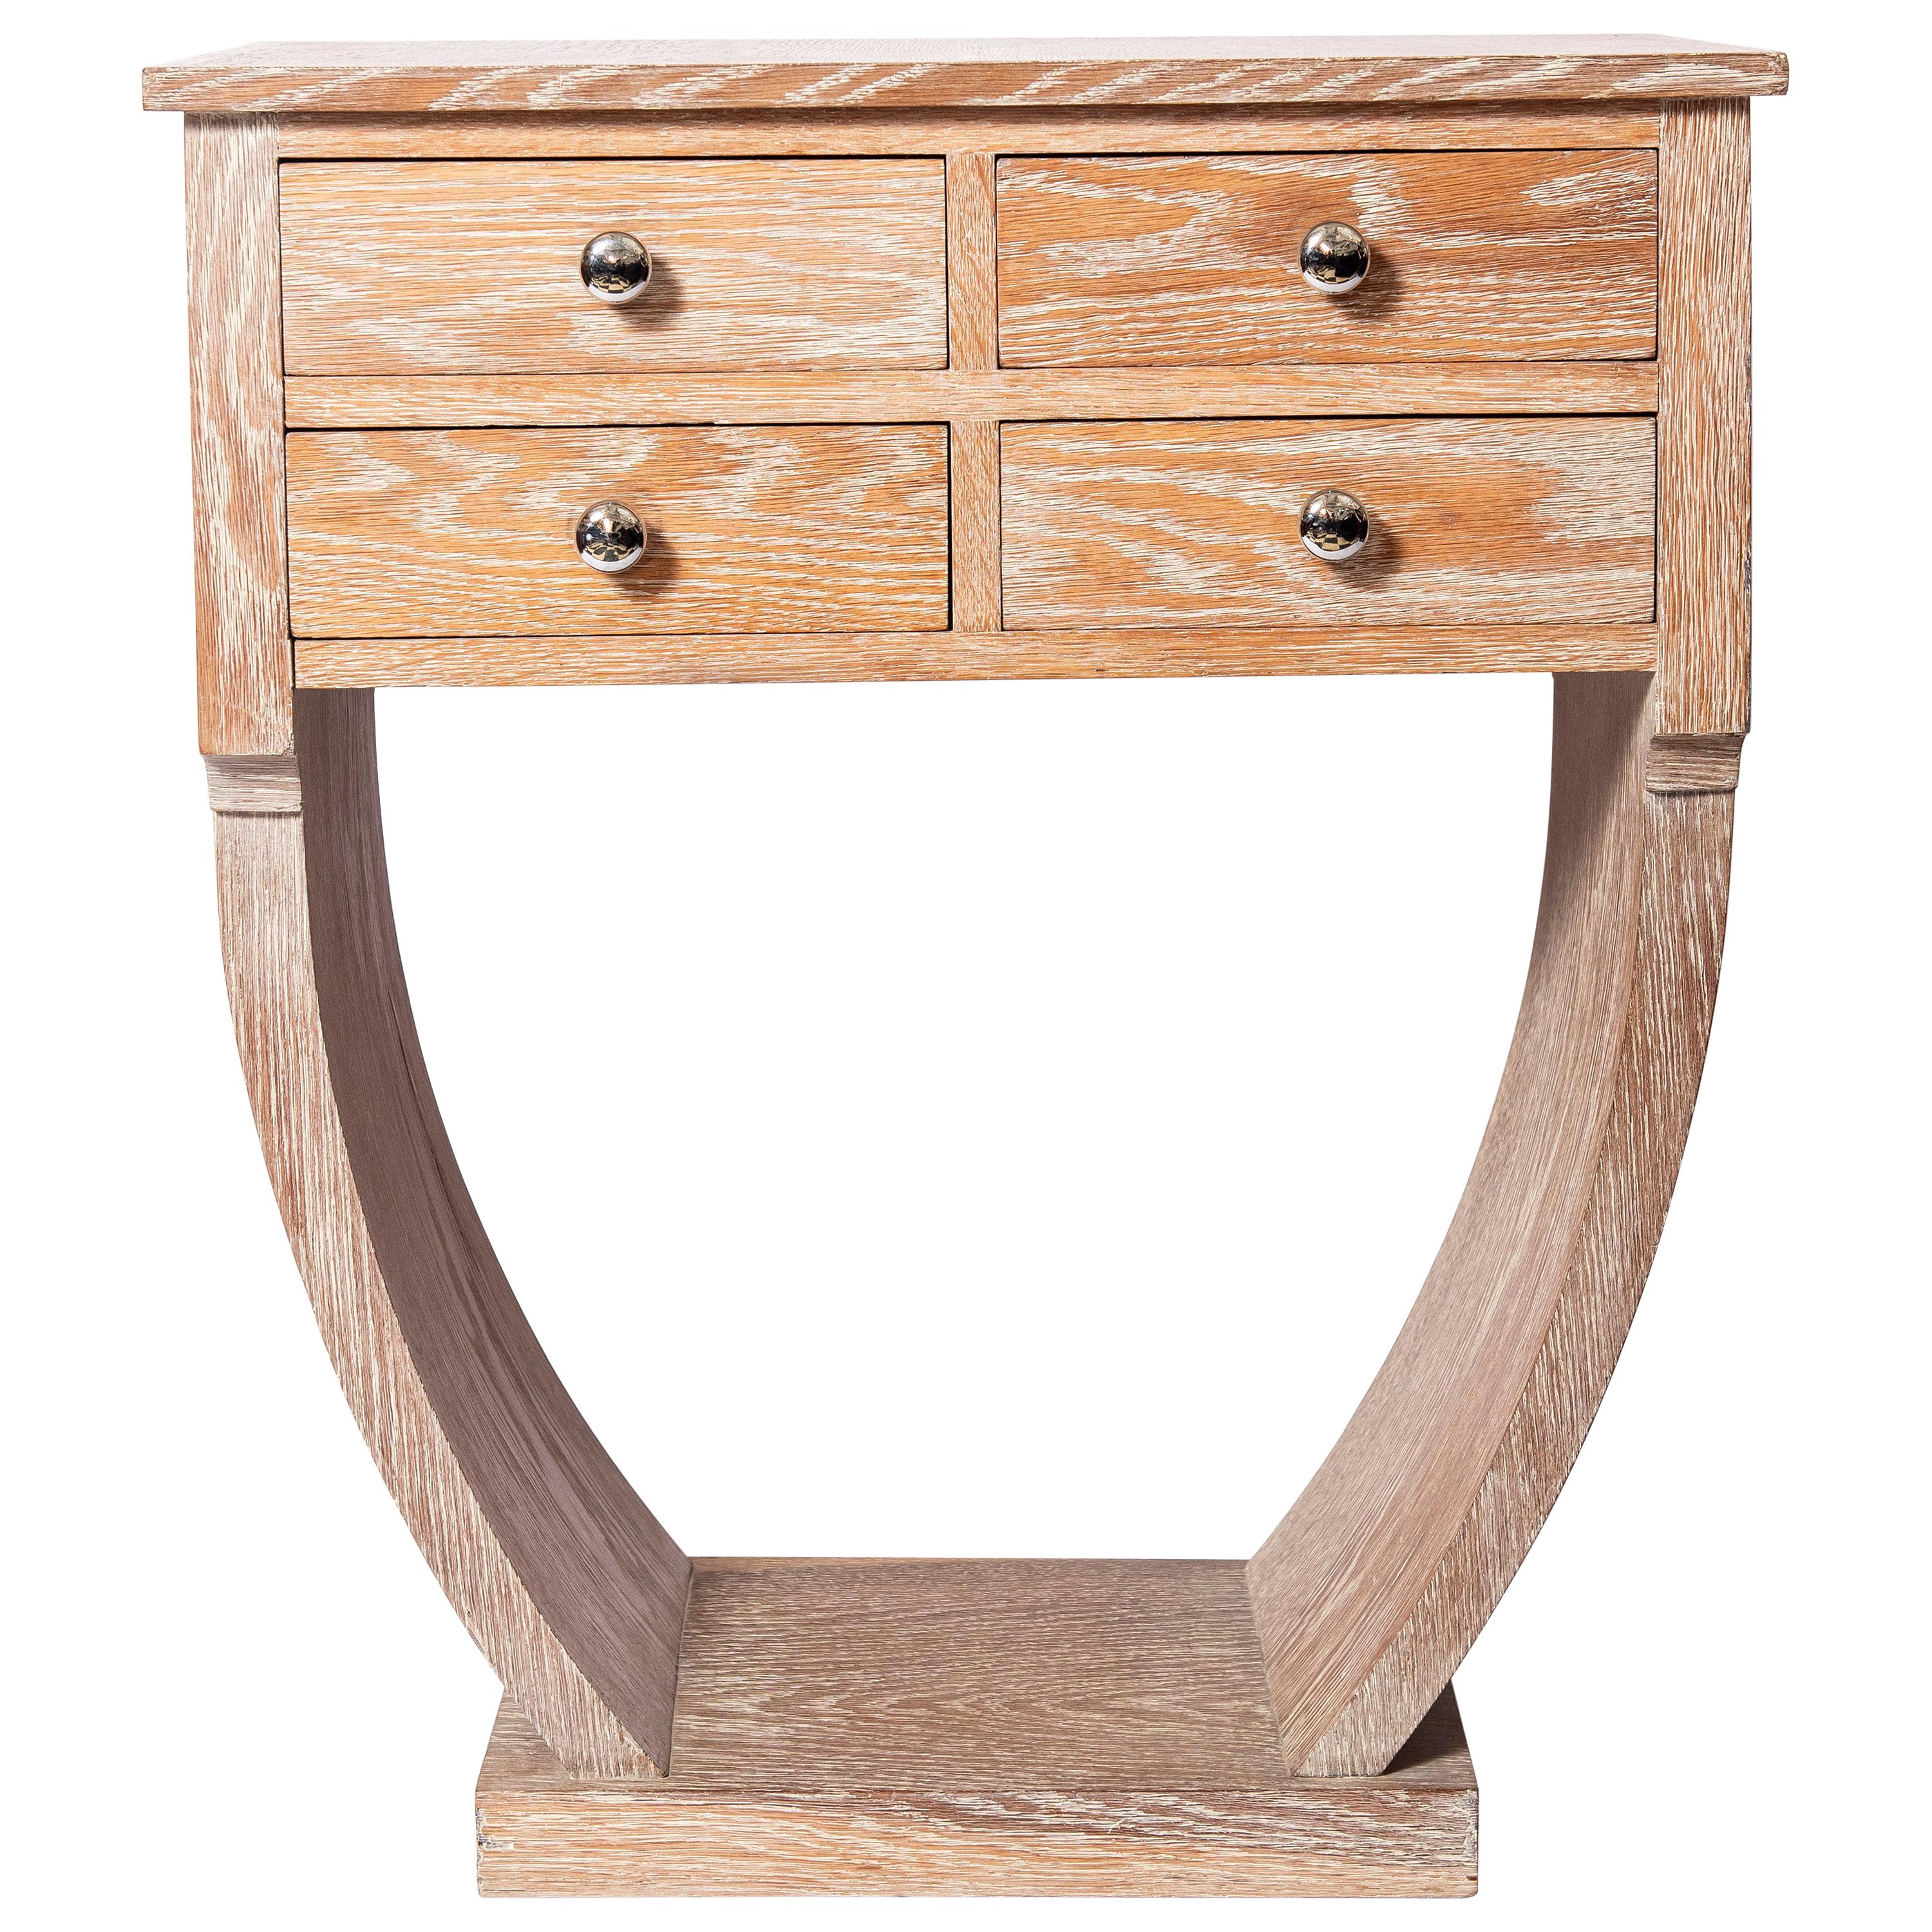 Limed Oak Console Table with Drawers, Art Deco Period, France, circa 1940